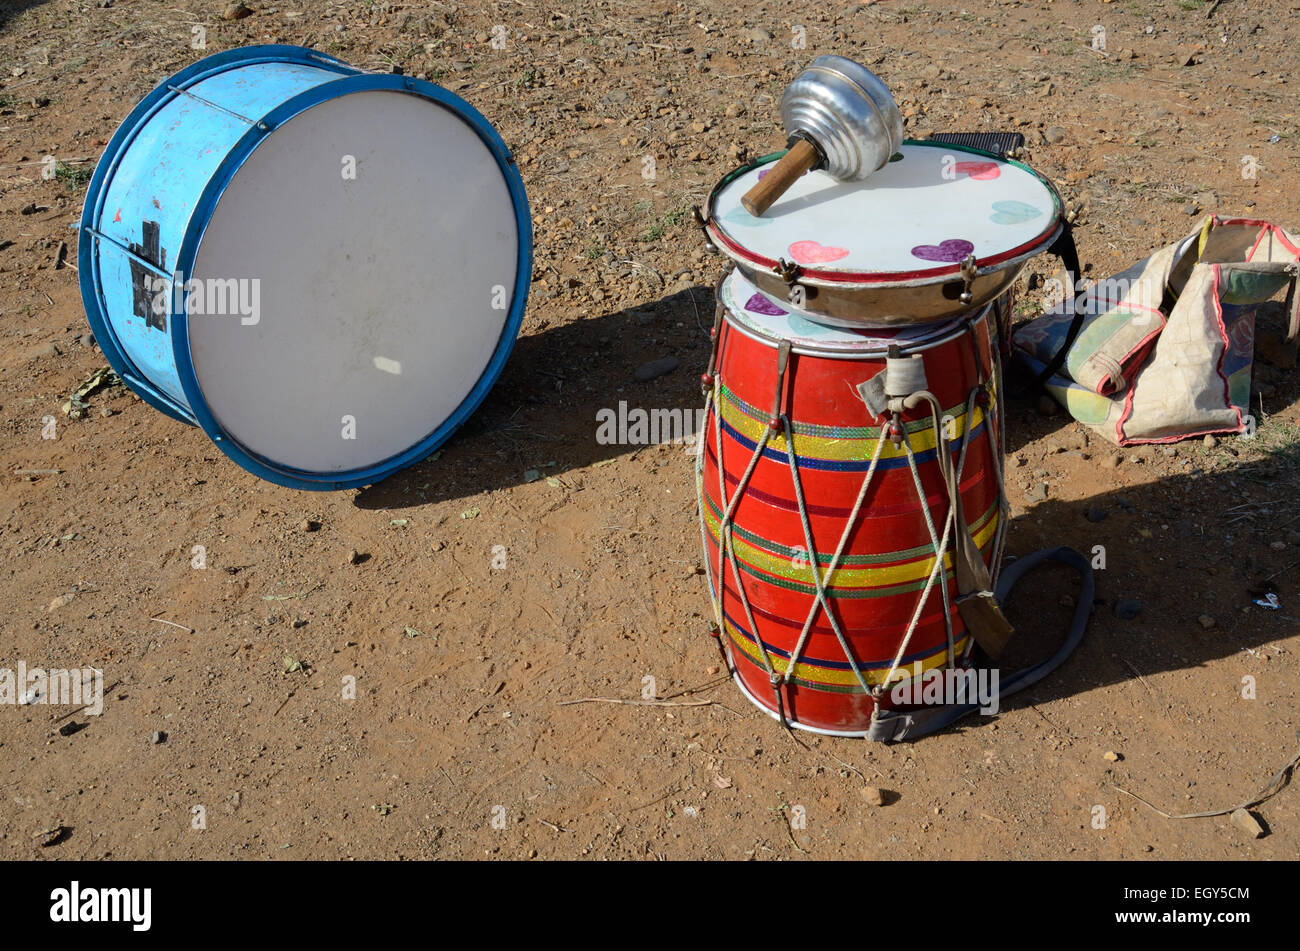 Drums and traditional musical Instruments ready for an Indian tribal village wedding Rajasthan India Stock Photo